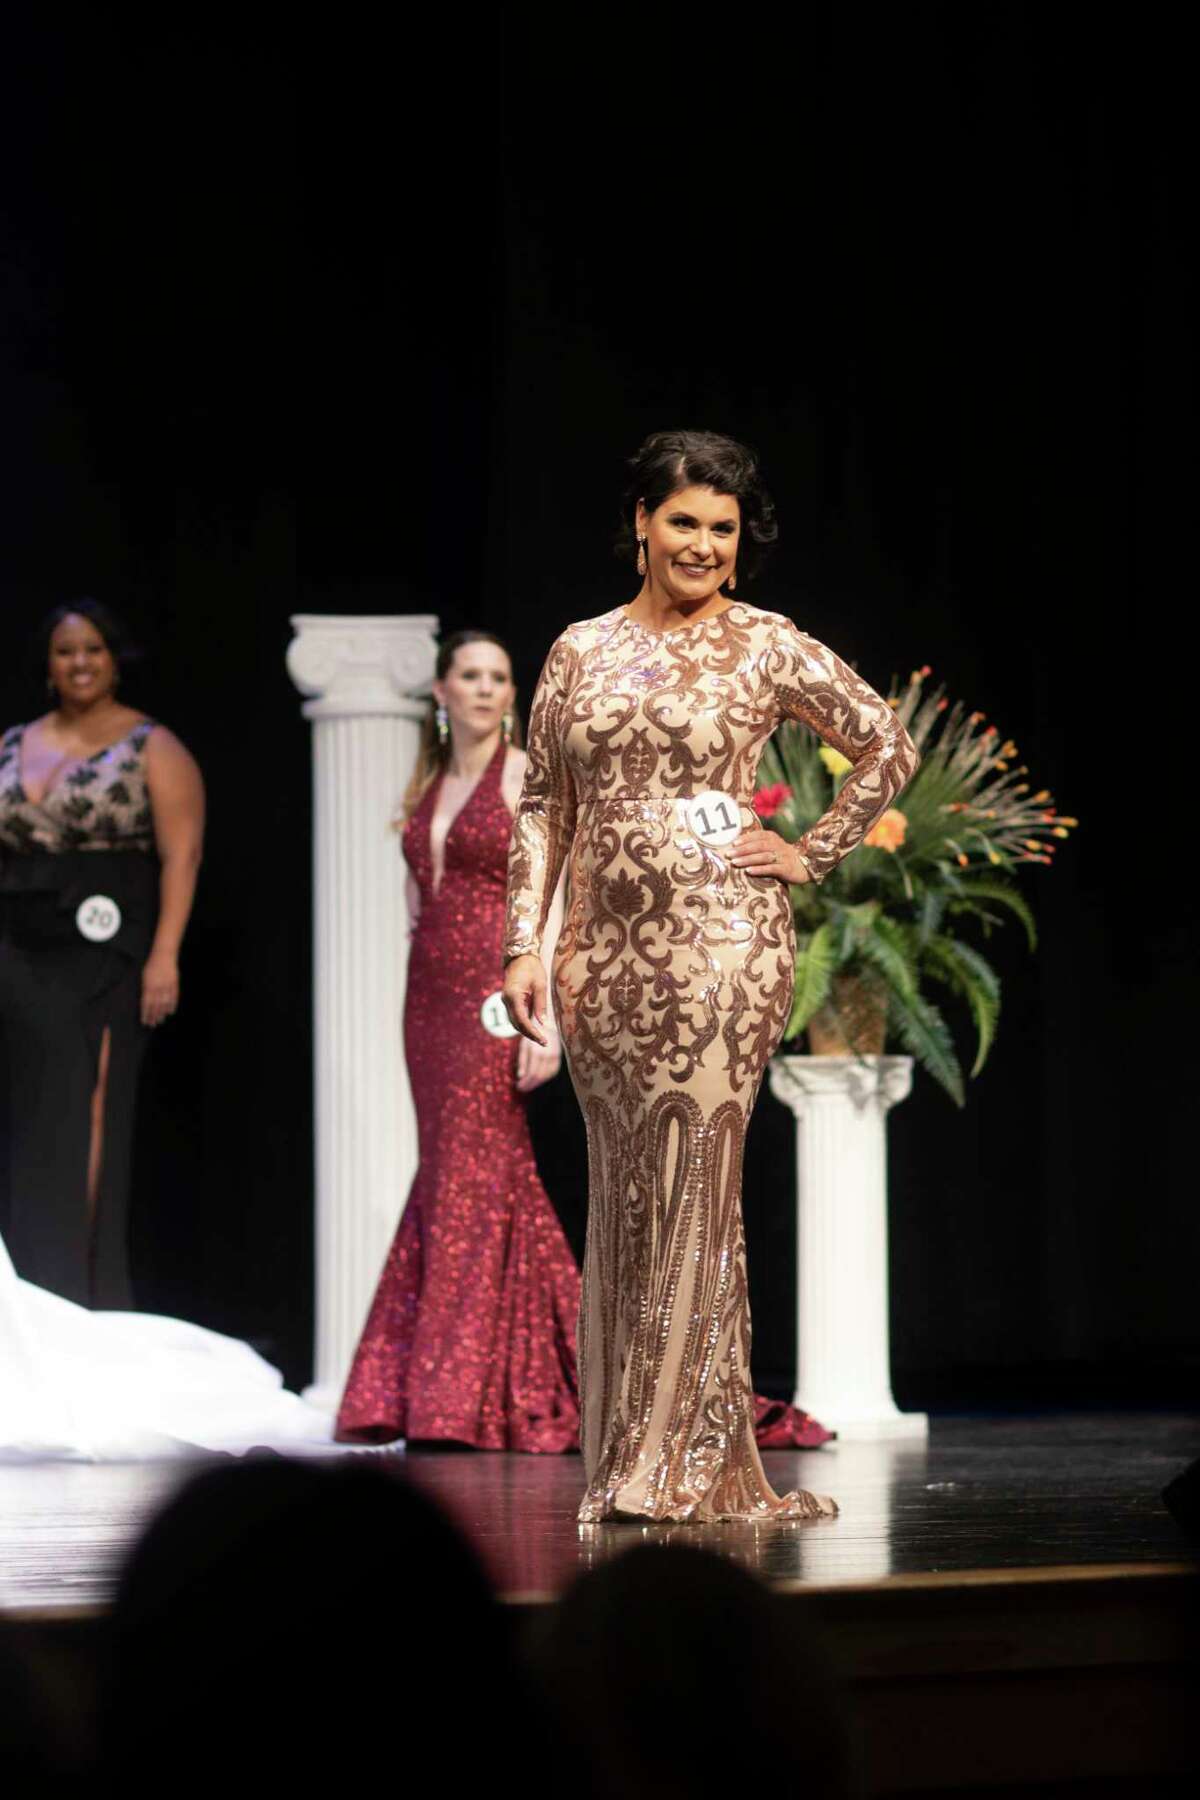 Mrs. MichiganAmerica Pageant features Midlanders